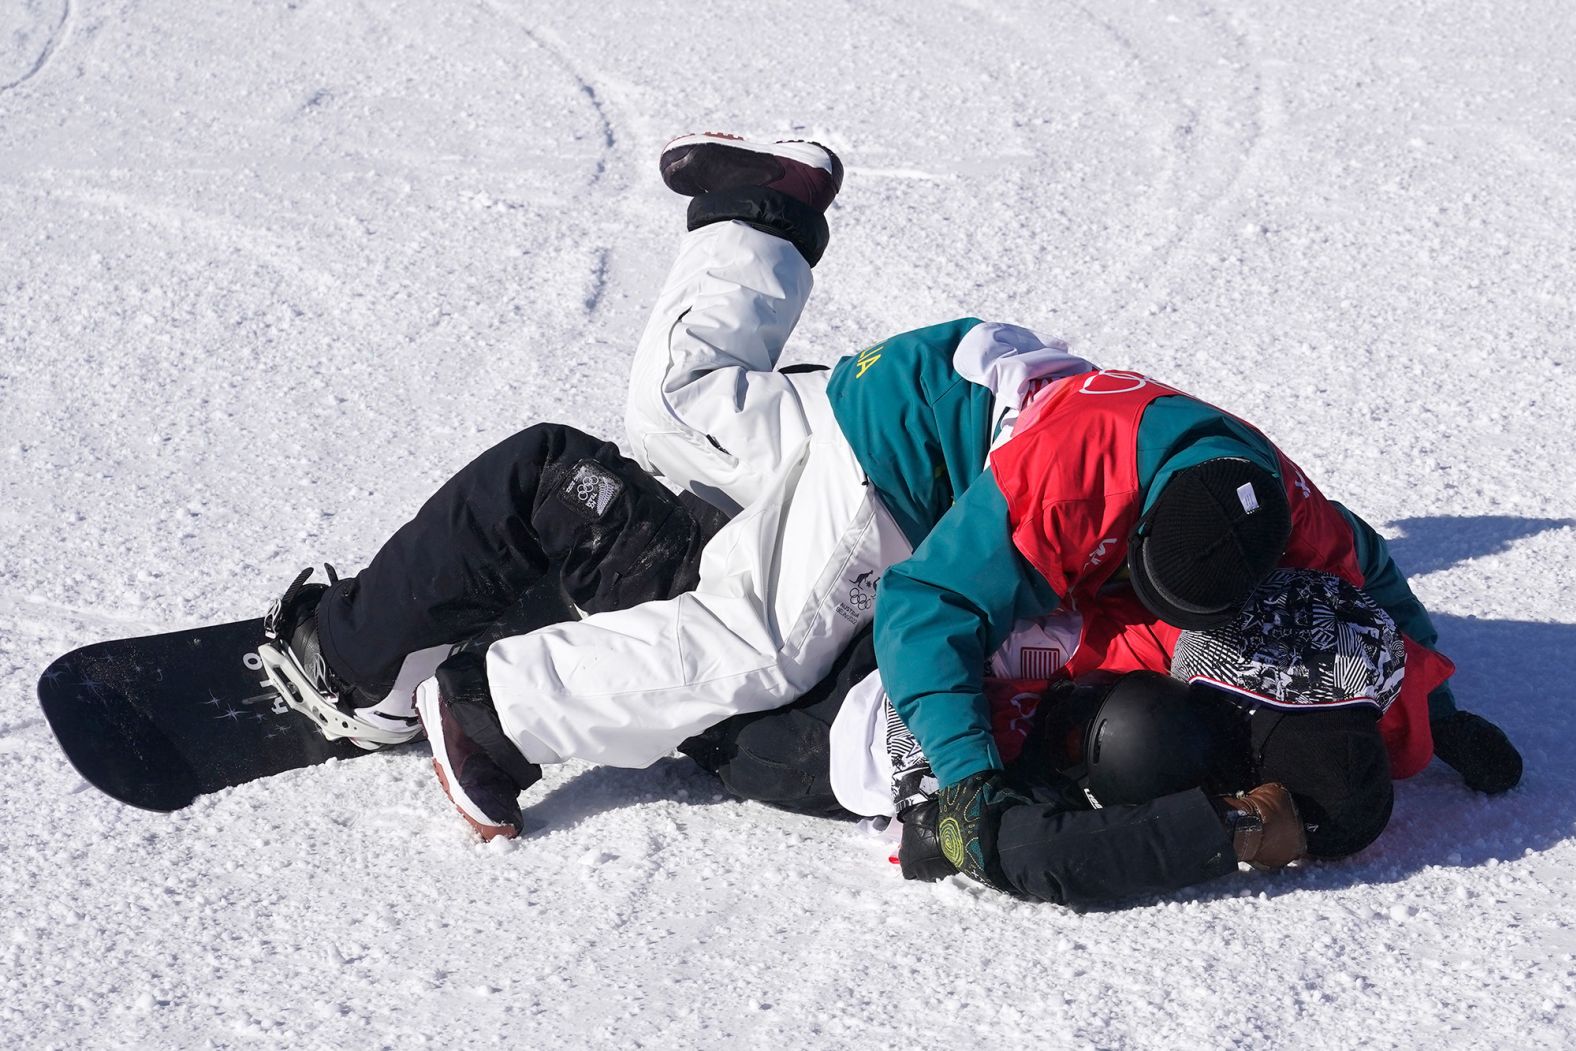 New Zealand snowboarder Zoi Sadowski-Synnott, bottom, is tackled by the United States' Julia Marino and Australia's Tess Coady after her final slopestyle run on February 6. Sadowski-Synnott <a href="index.php?page=&url=https%3A%2F%2Fwww.cnn.com%2Fworld%2Flive-news%2Fbeijing-winter-olympics-02-06-22-spt%2Fh_313bd248a76b7d0101ec6b03c5aa9160" target="_blank">made history</a> by winning her country's first-ever gold in the Winter Olympics. Marino won the silver and Coady won the bronze.